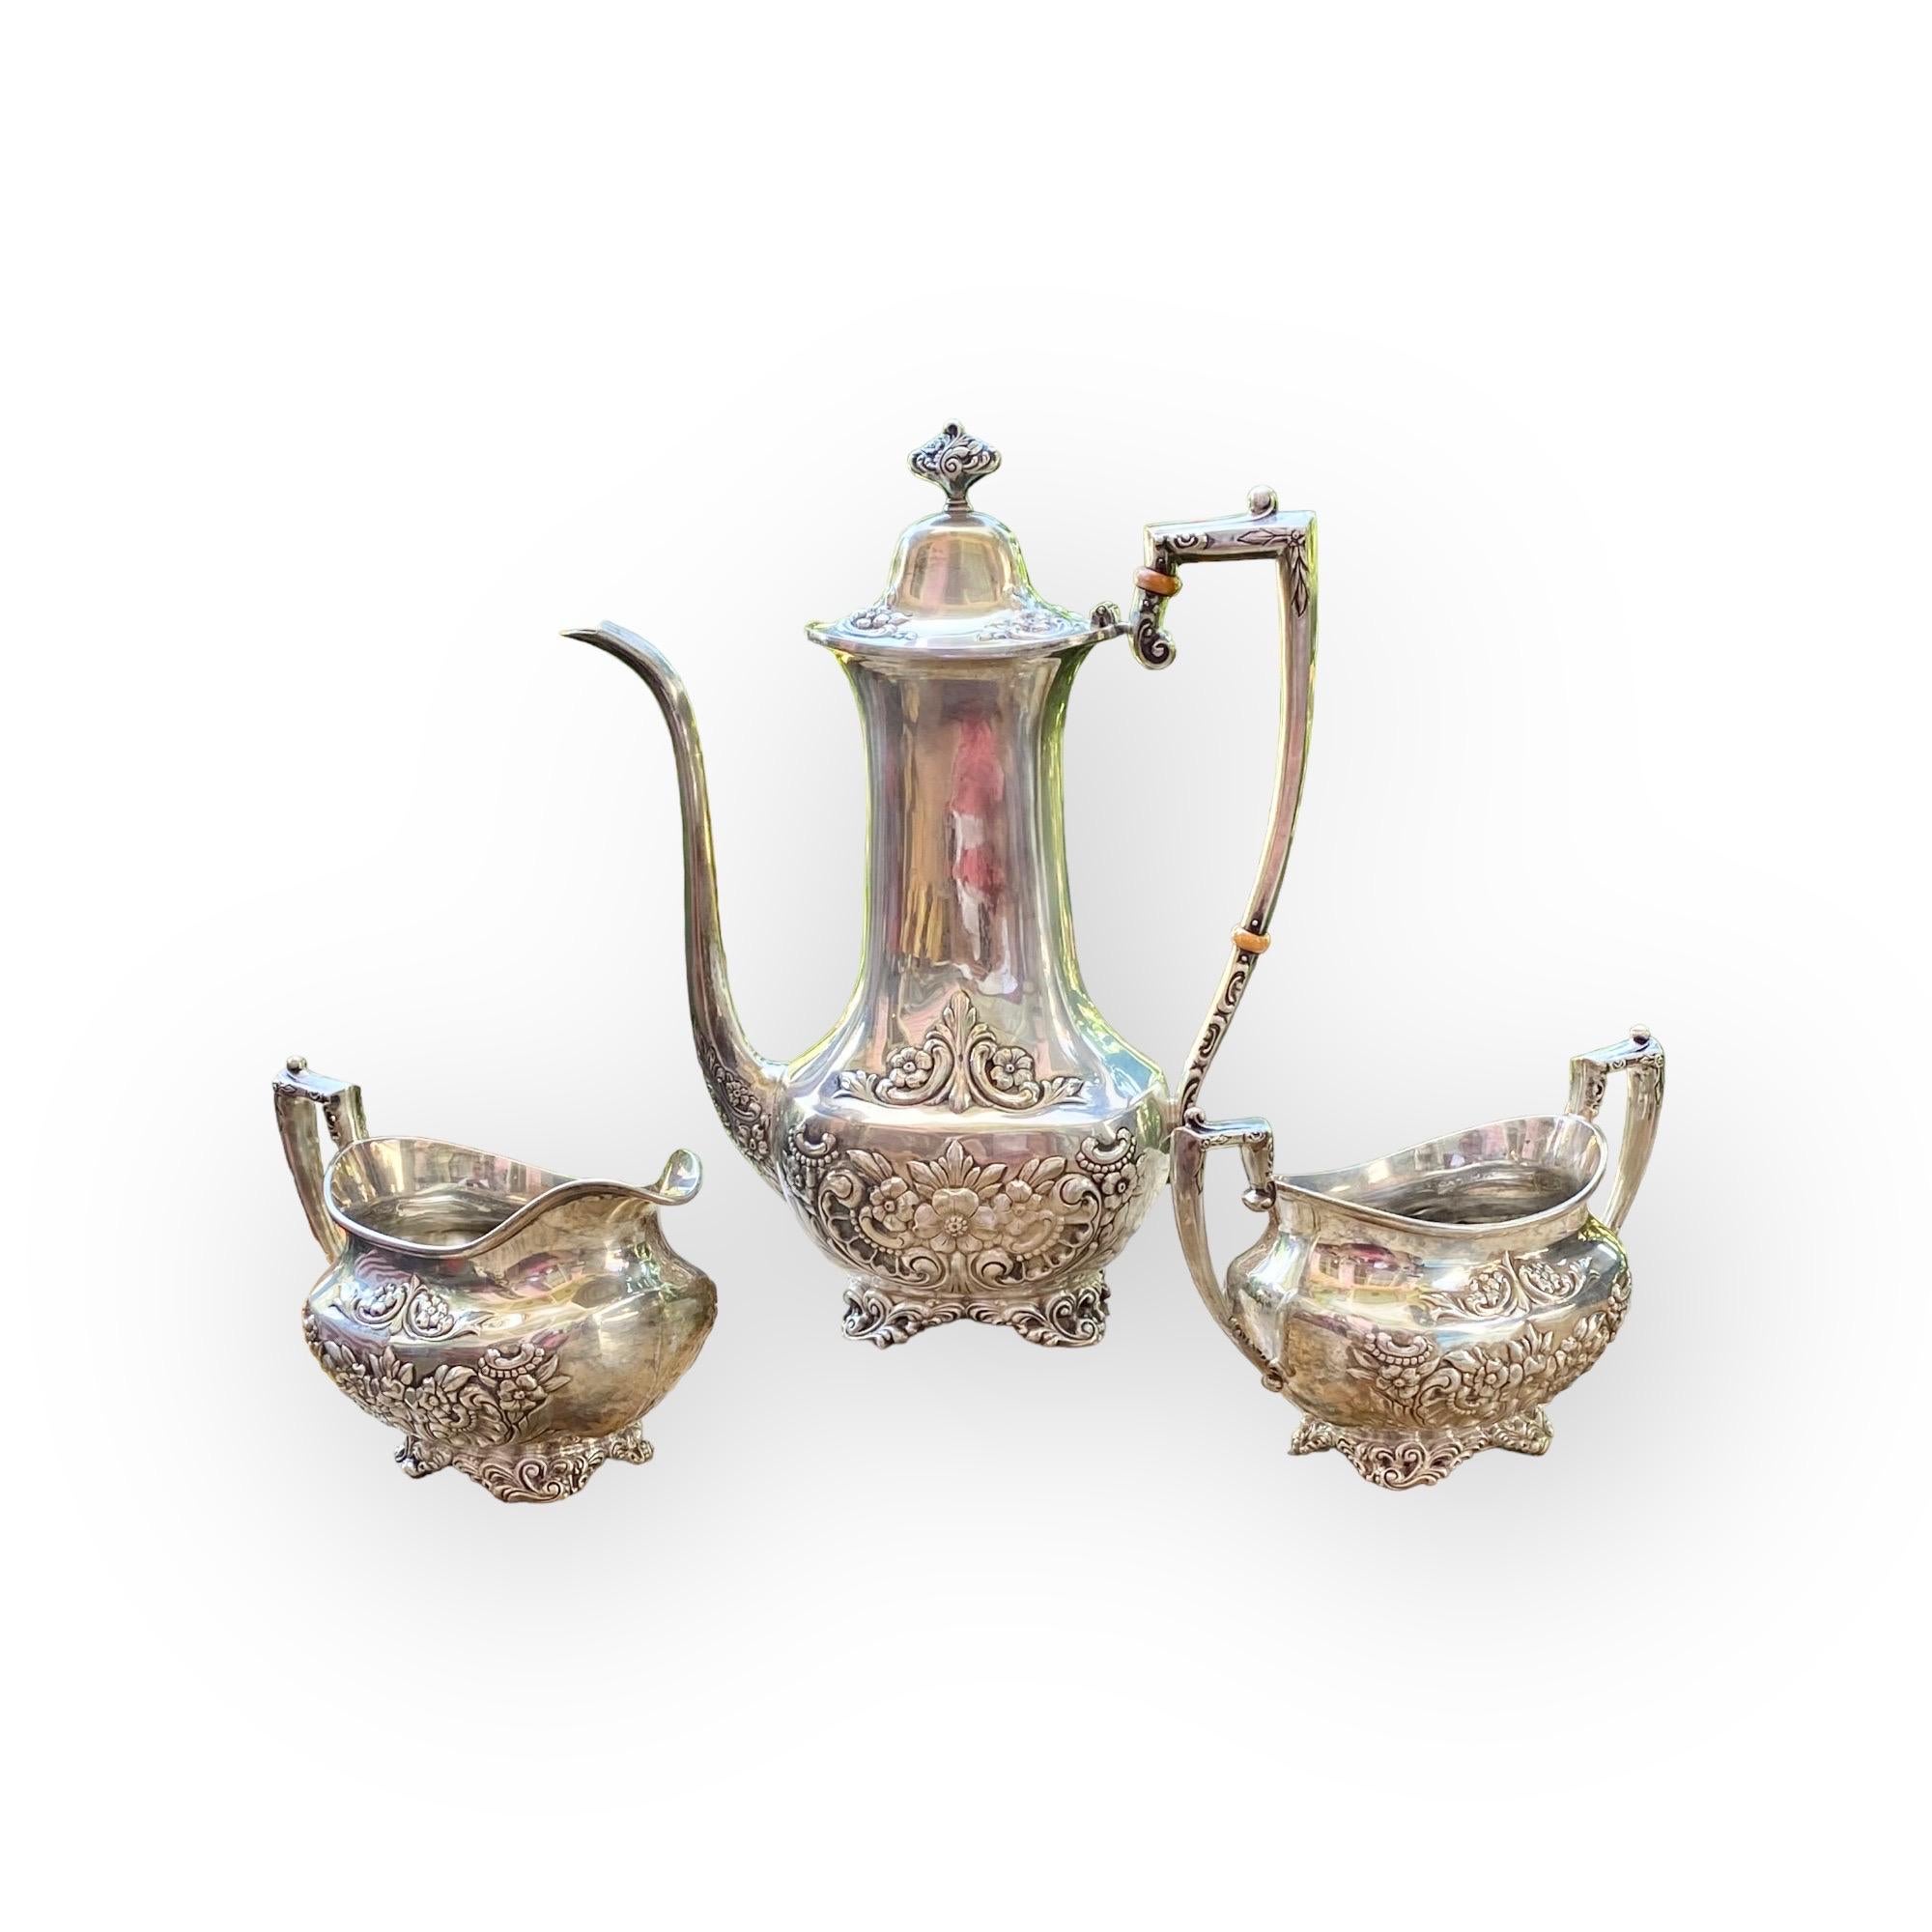 A sterling silver after-dinner coffee service, consisting of one coffee pot, one open creamer and one open sugar bowl, D Whiting, Botticelli pattern. Total weight 28.55 troy ounces. 

Founded in Attleboro, Massachusetts, in 1866 by William Dean